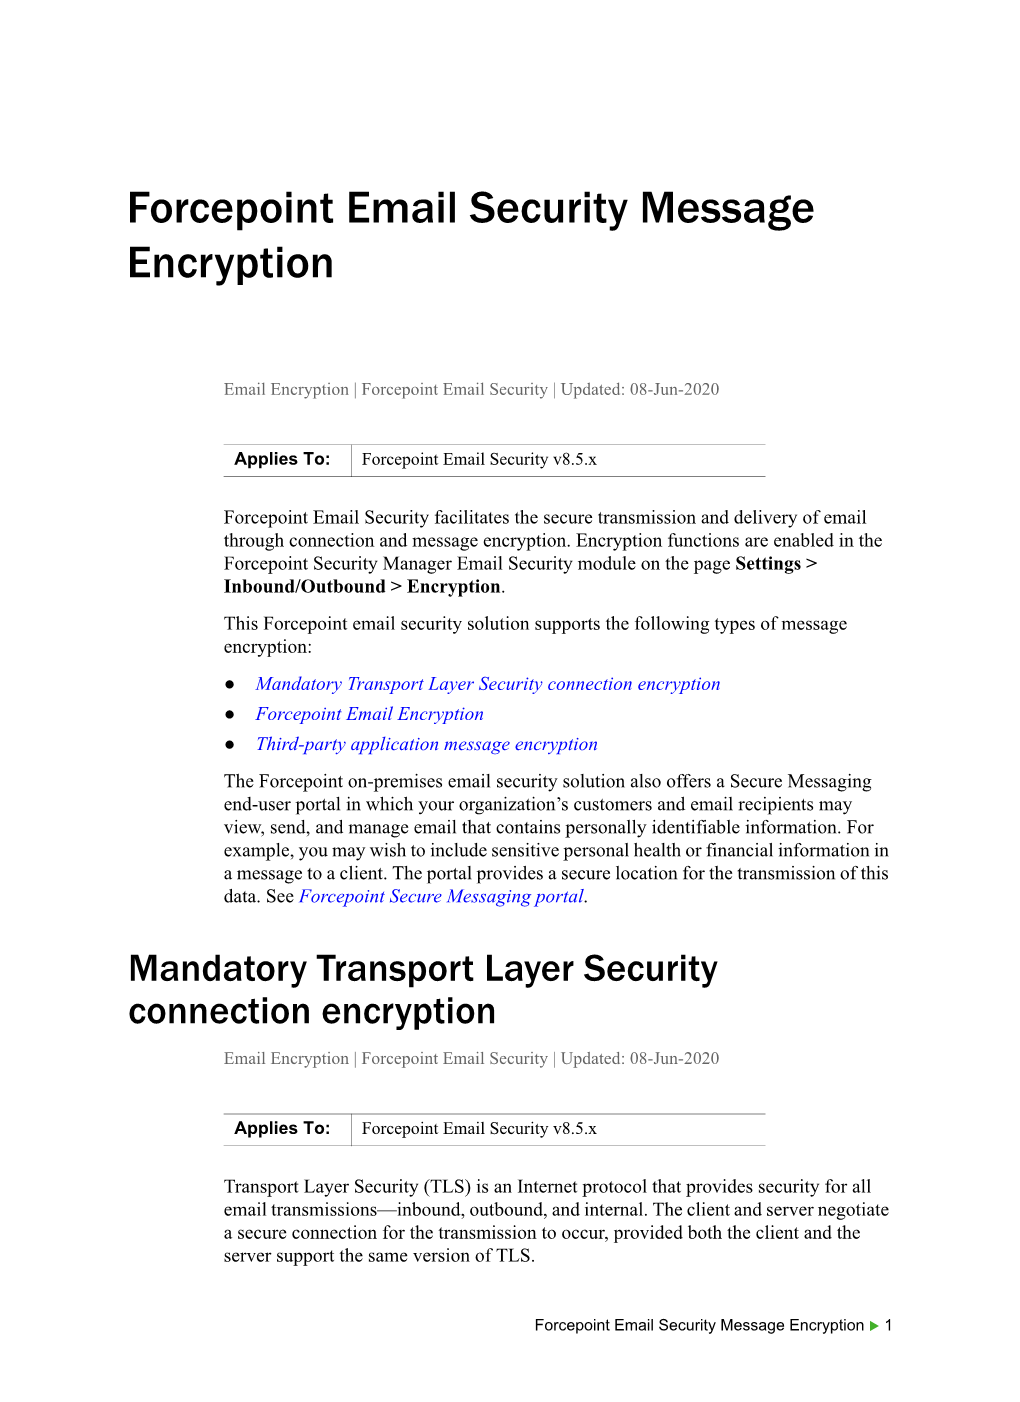 Forcepoint Email Security Message Encryption